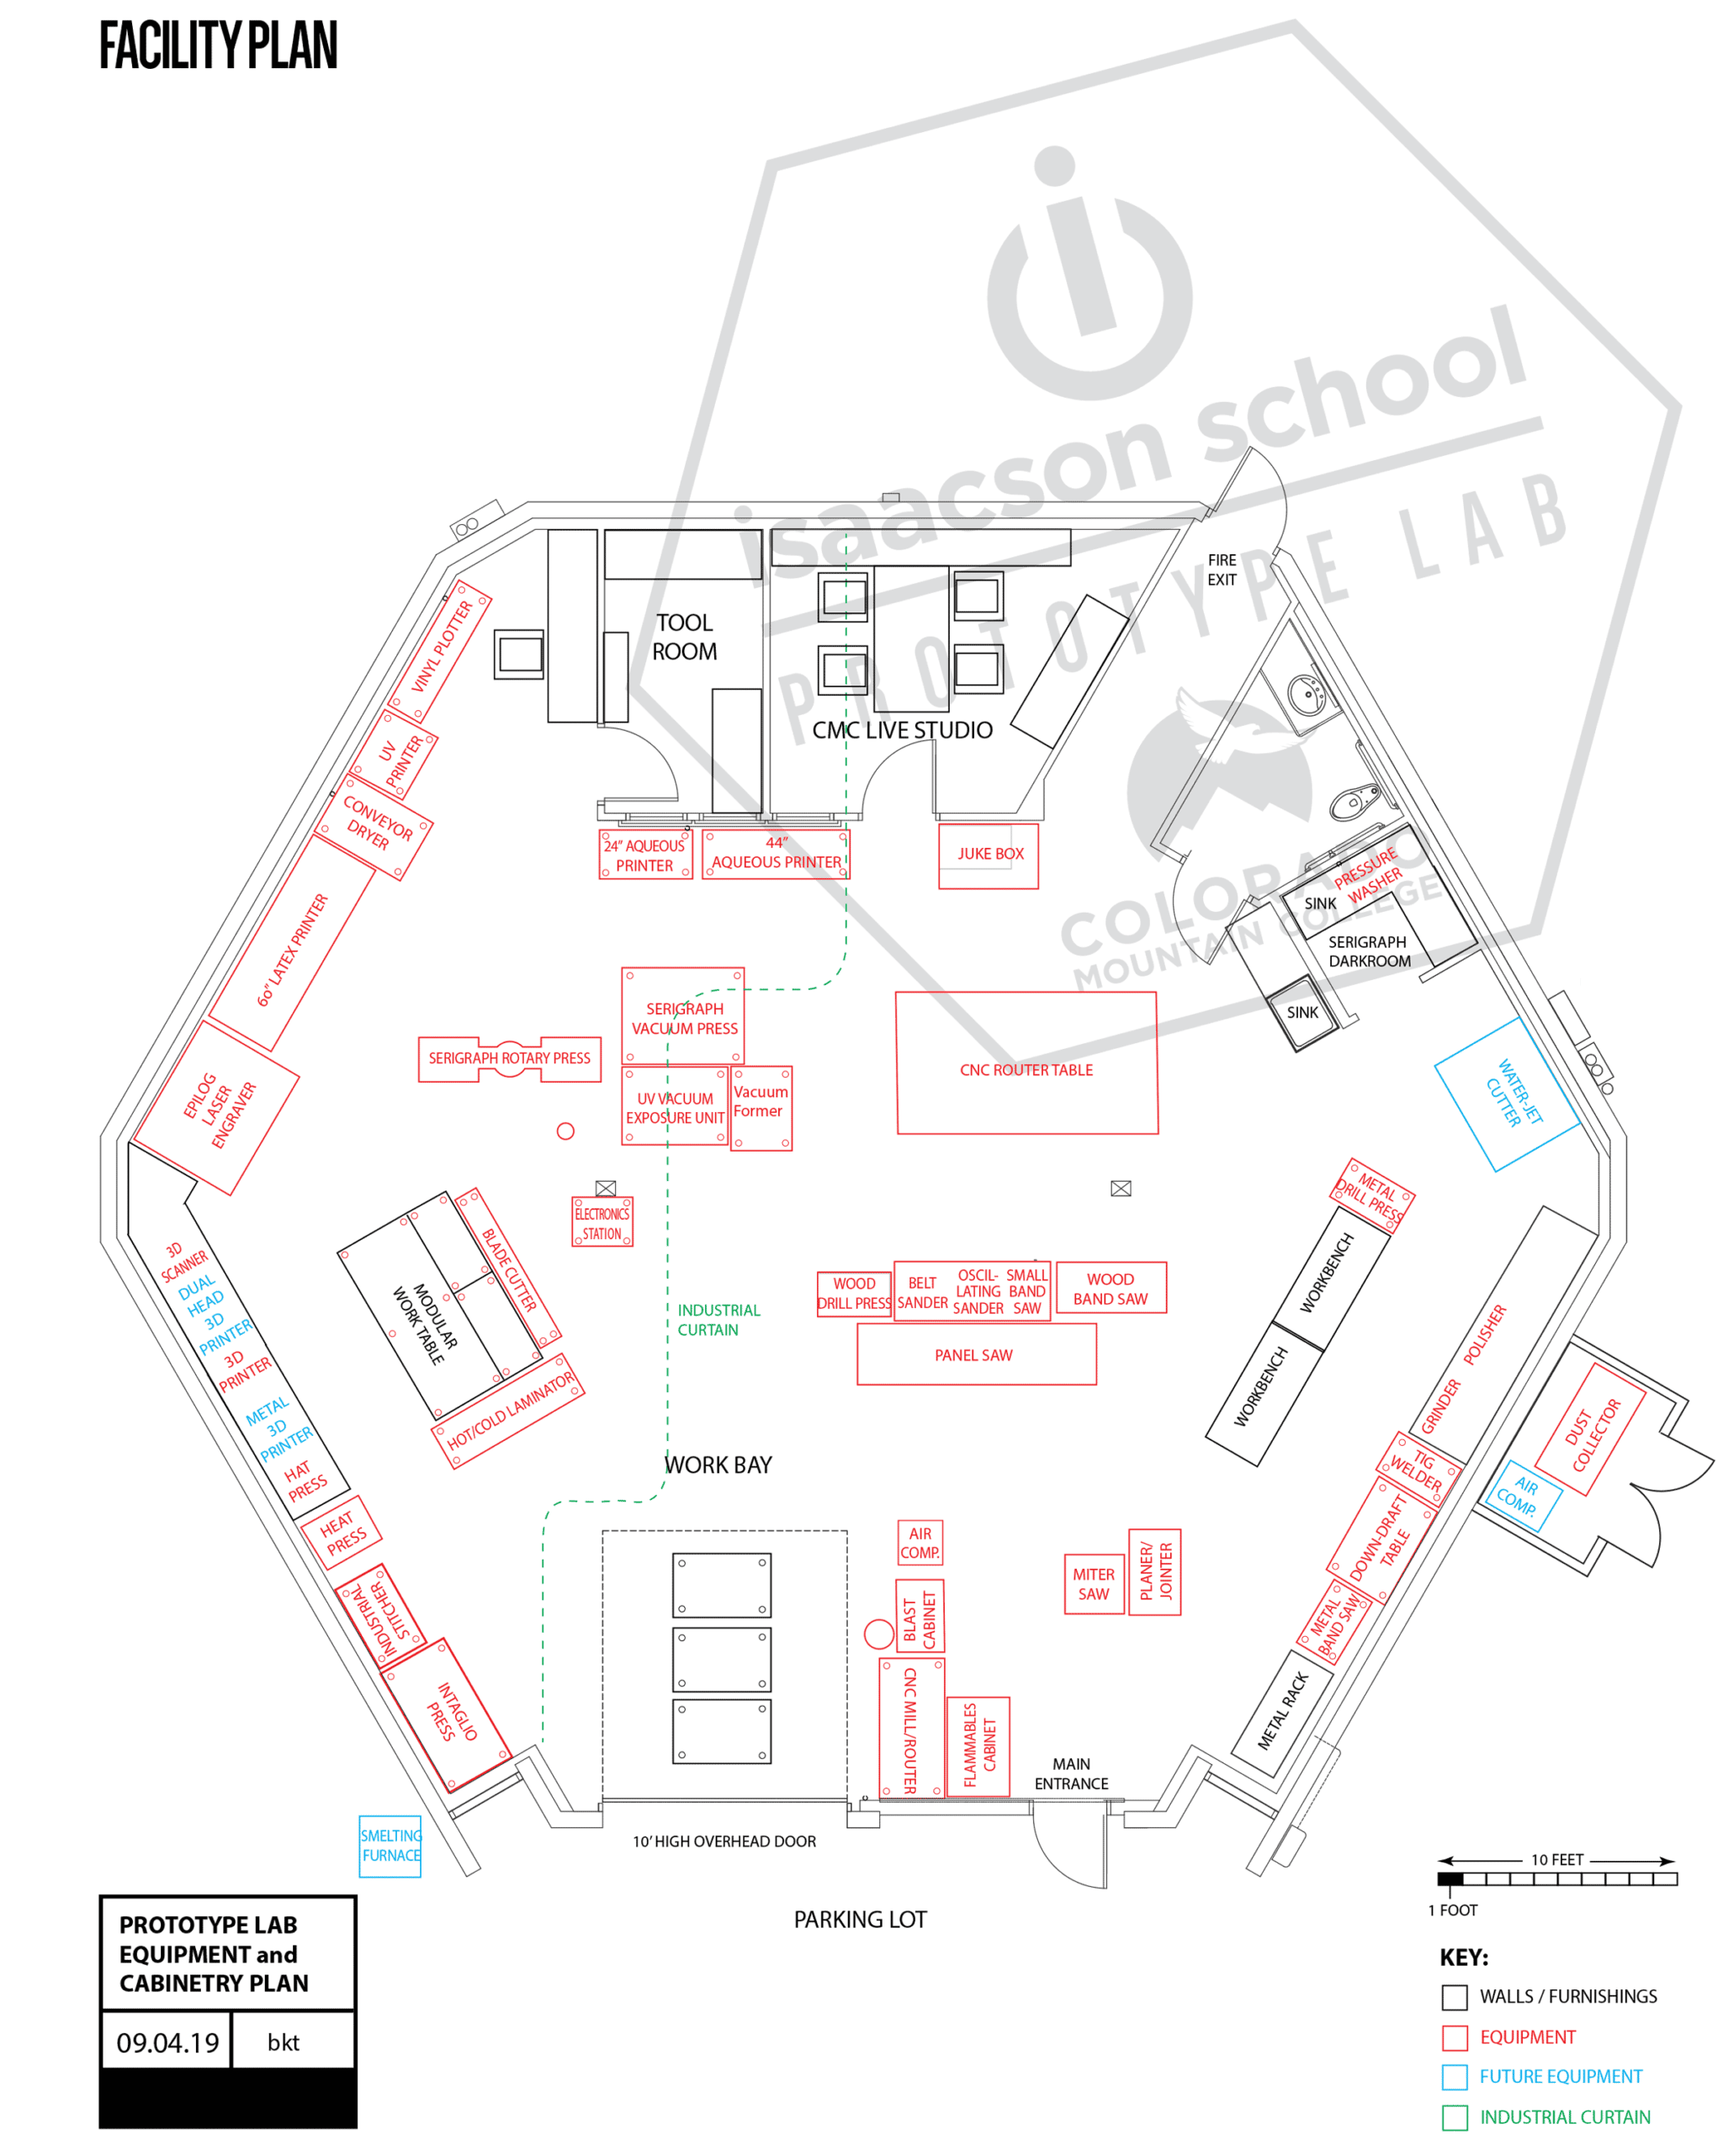 Layout of the Isaacson School Prototype Lab